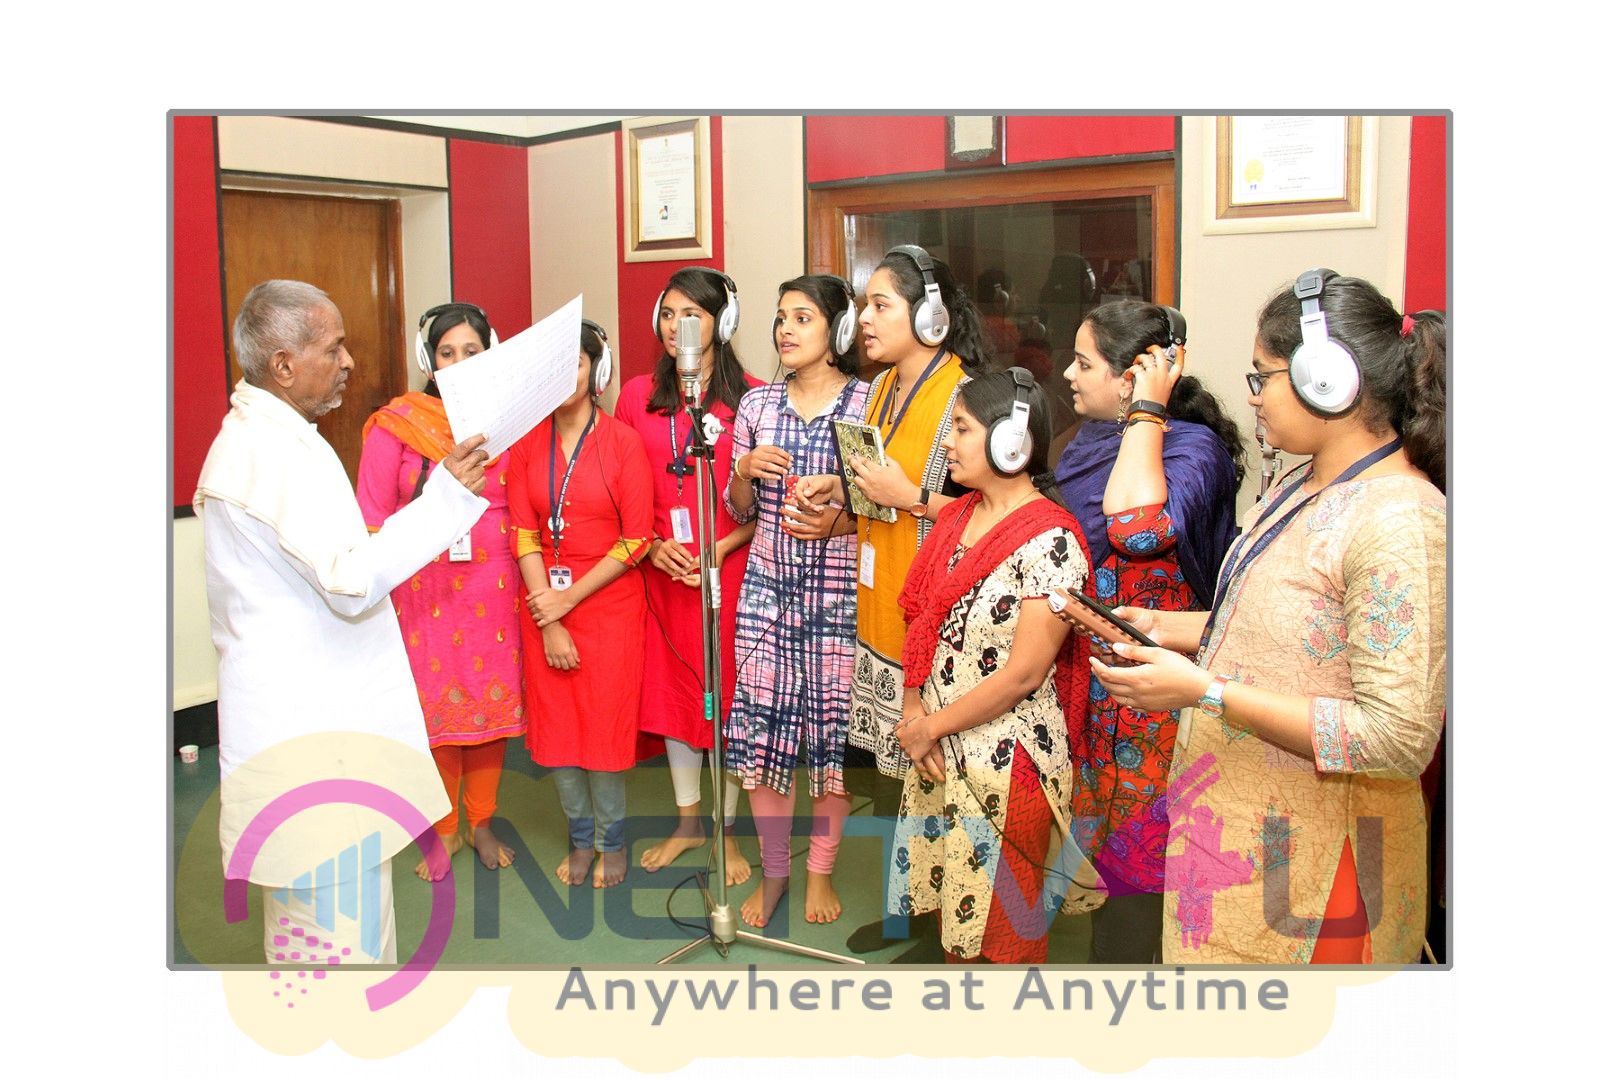 Ilayaraja Selected 9 Of The Students Be Singing Soon For The Composer In His Films Pics Tamil Gallery